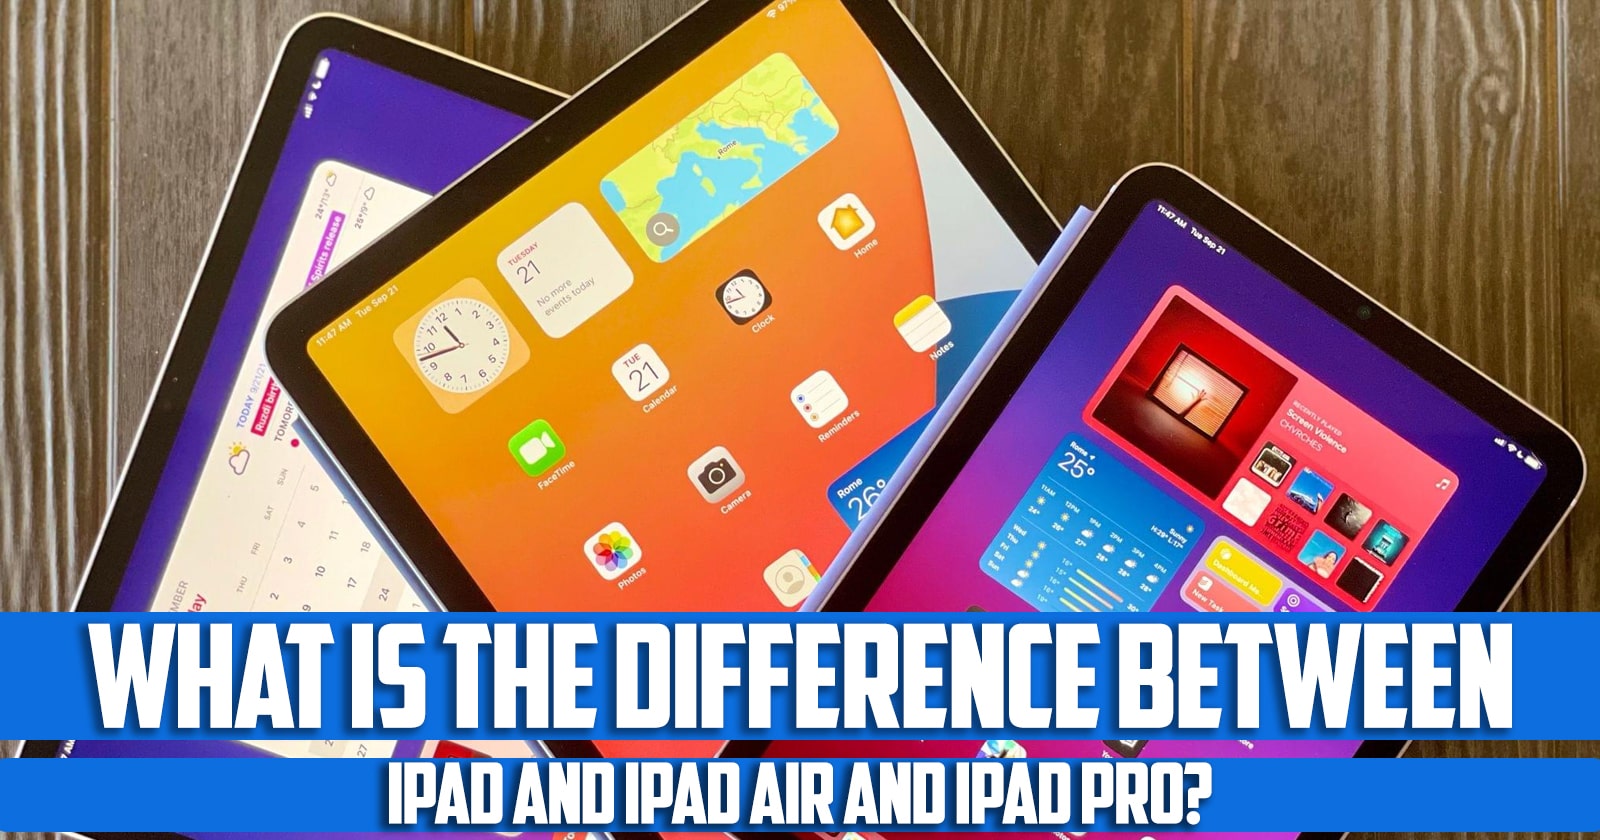 What is the difference between iPad and iPad Air and iPad Pro?